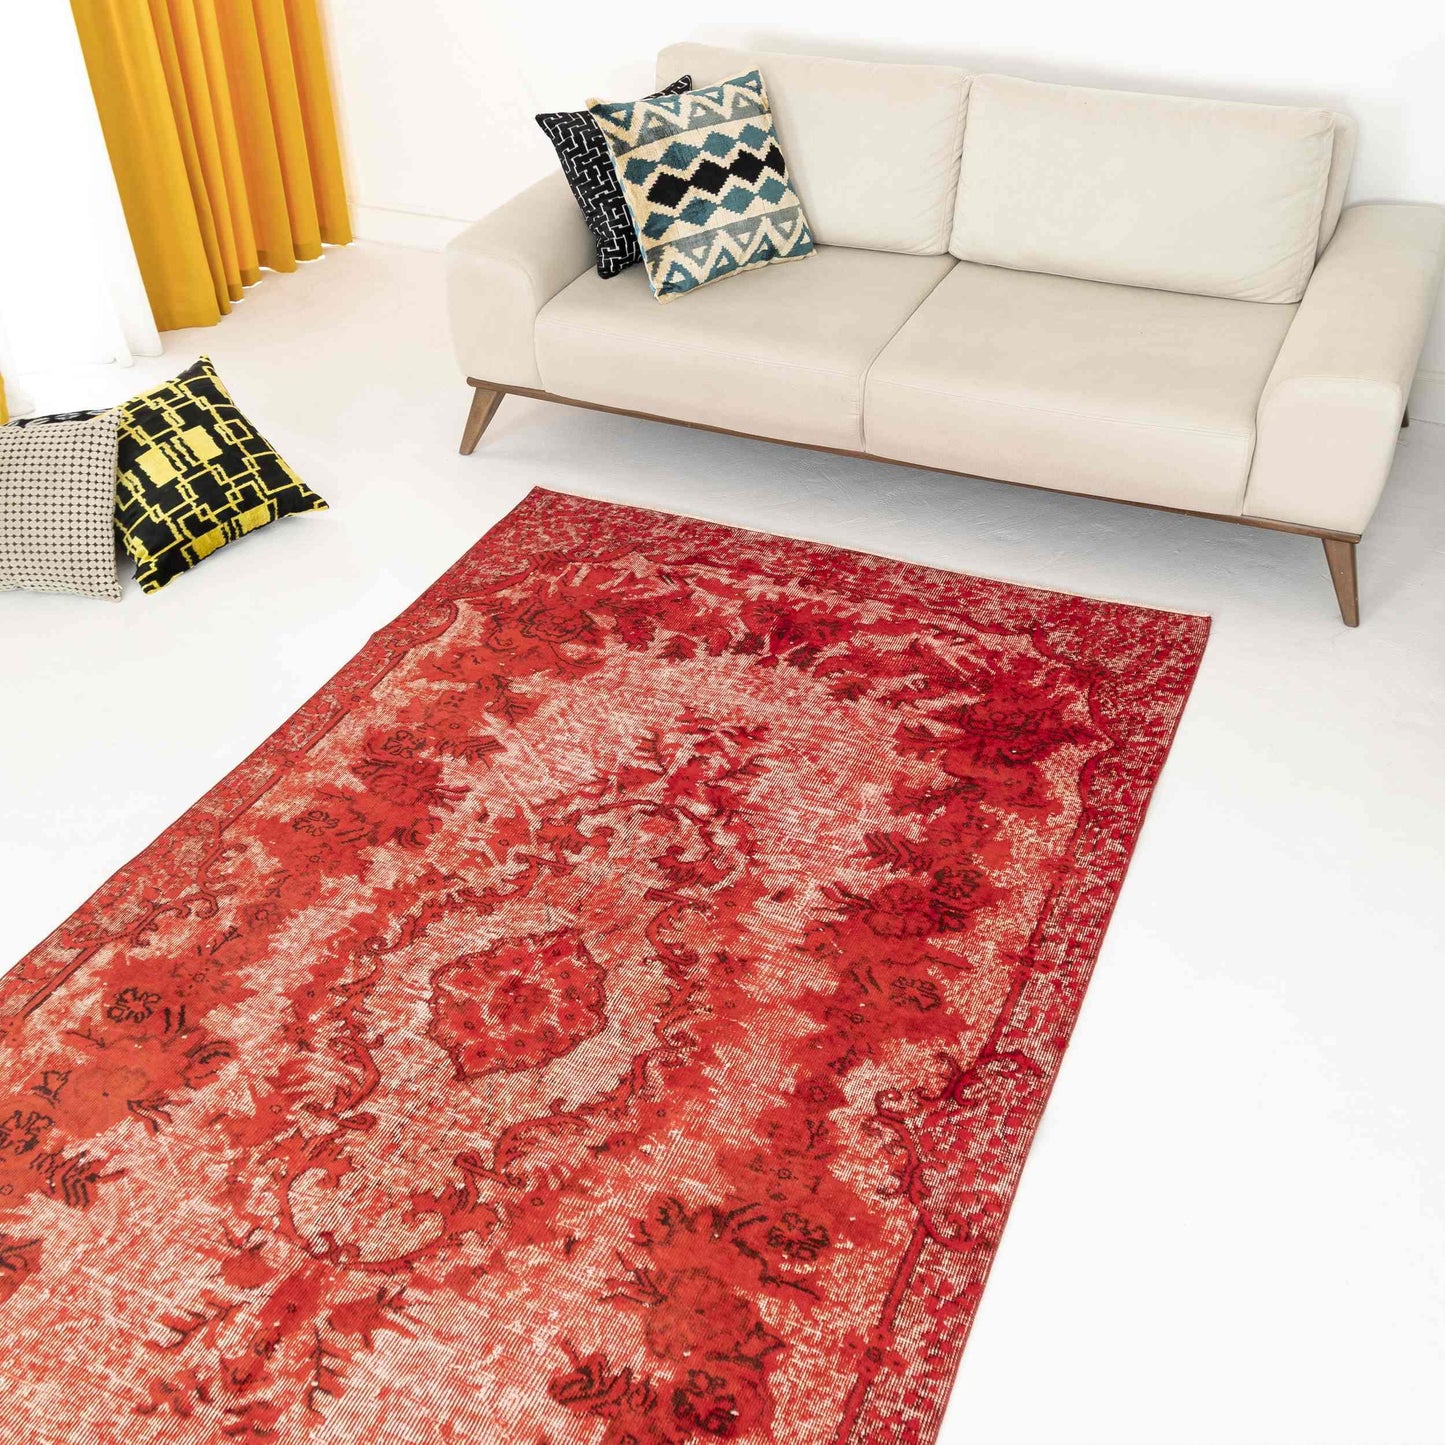 Oriental Rug Vintage Hand Knotted Wool On Cotton 161 x 290 Cm - 5' 4'' x 9' 7'' Red C014 ER12